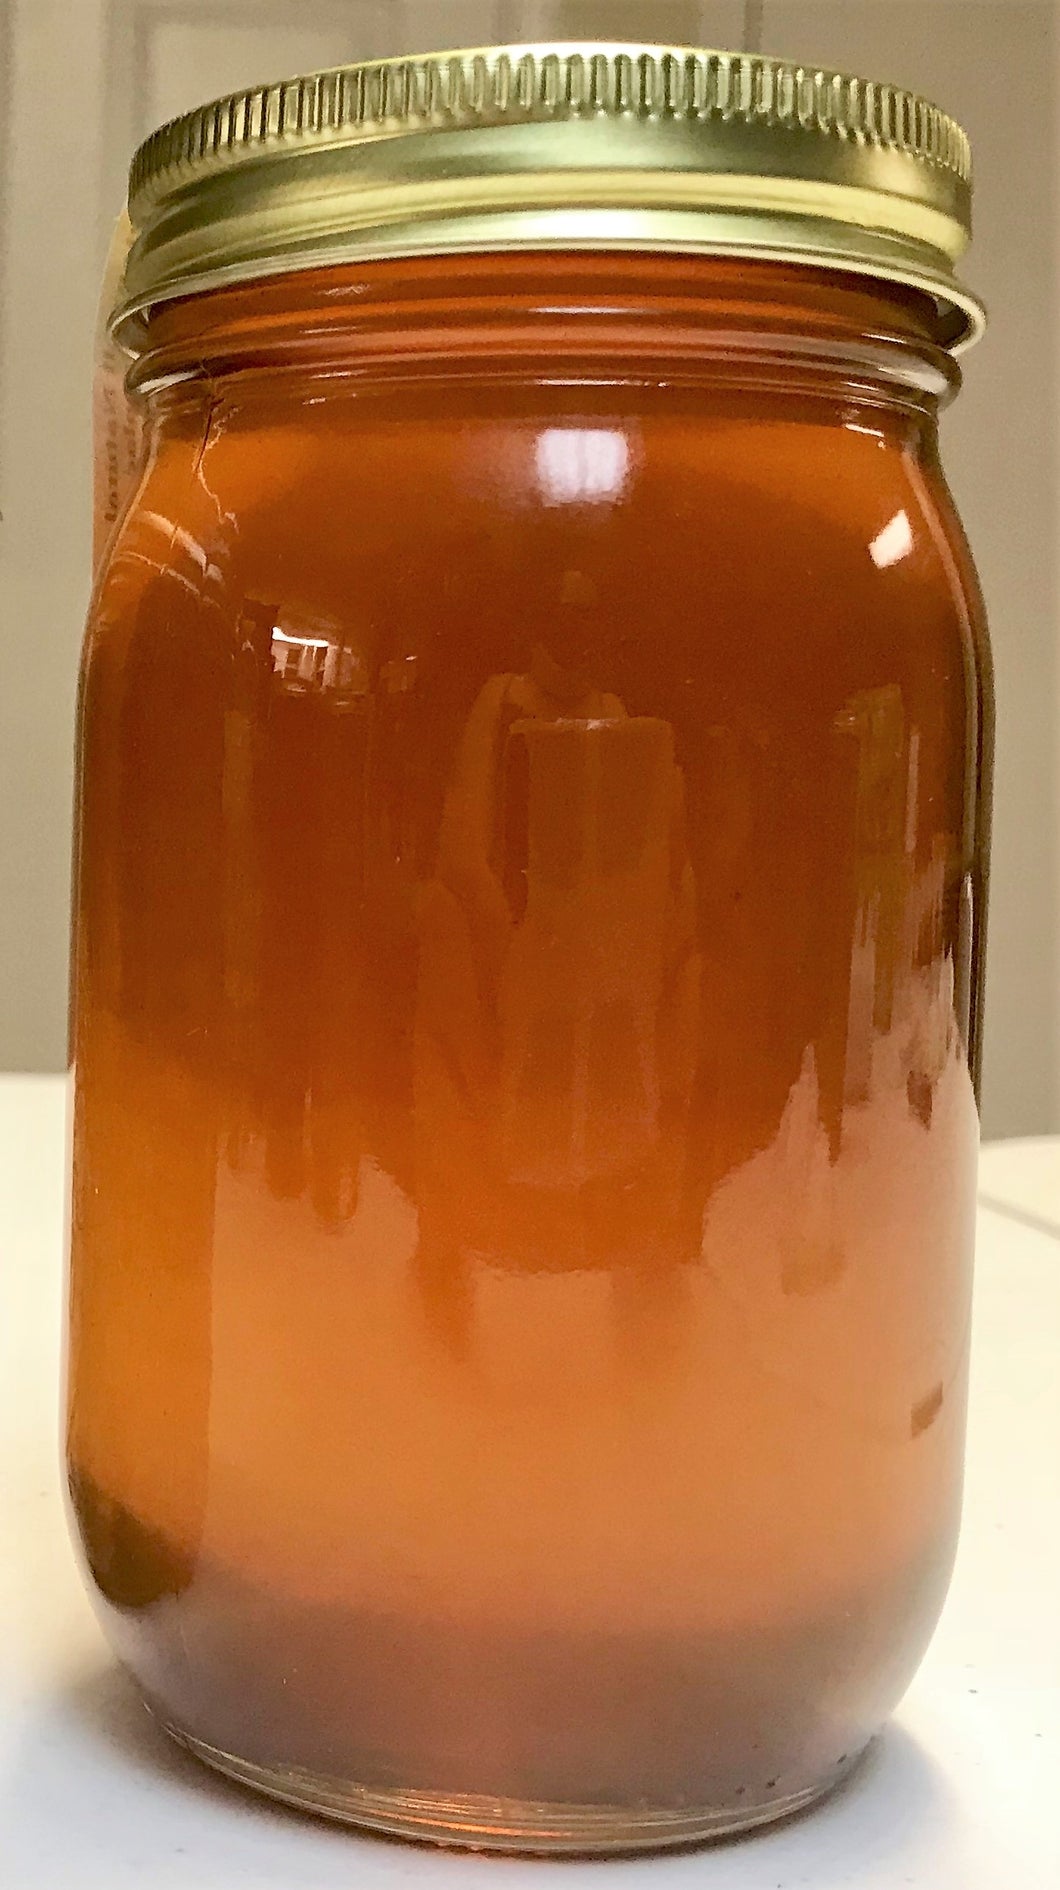 RAW LOCAL HONEY (Without Comb)